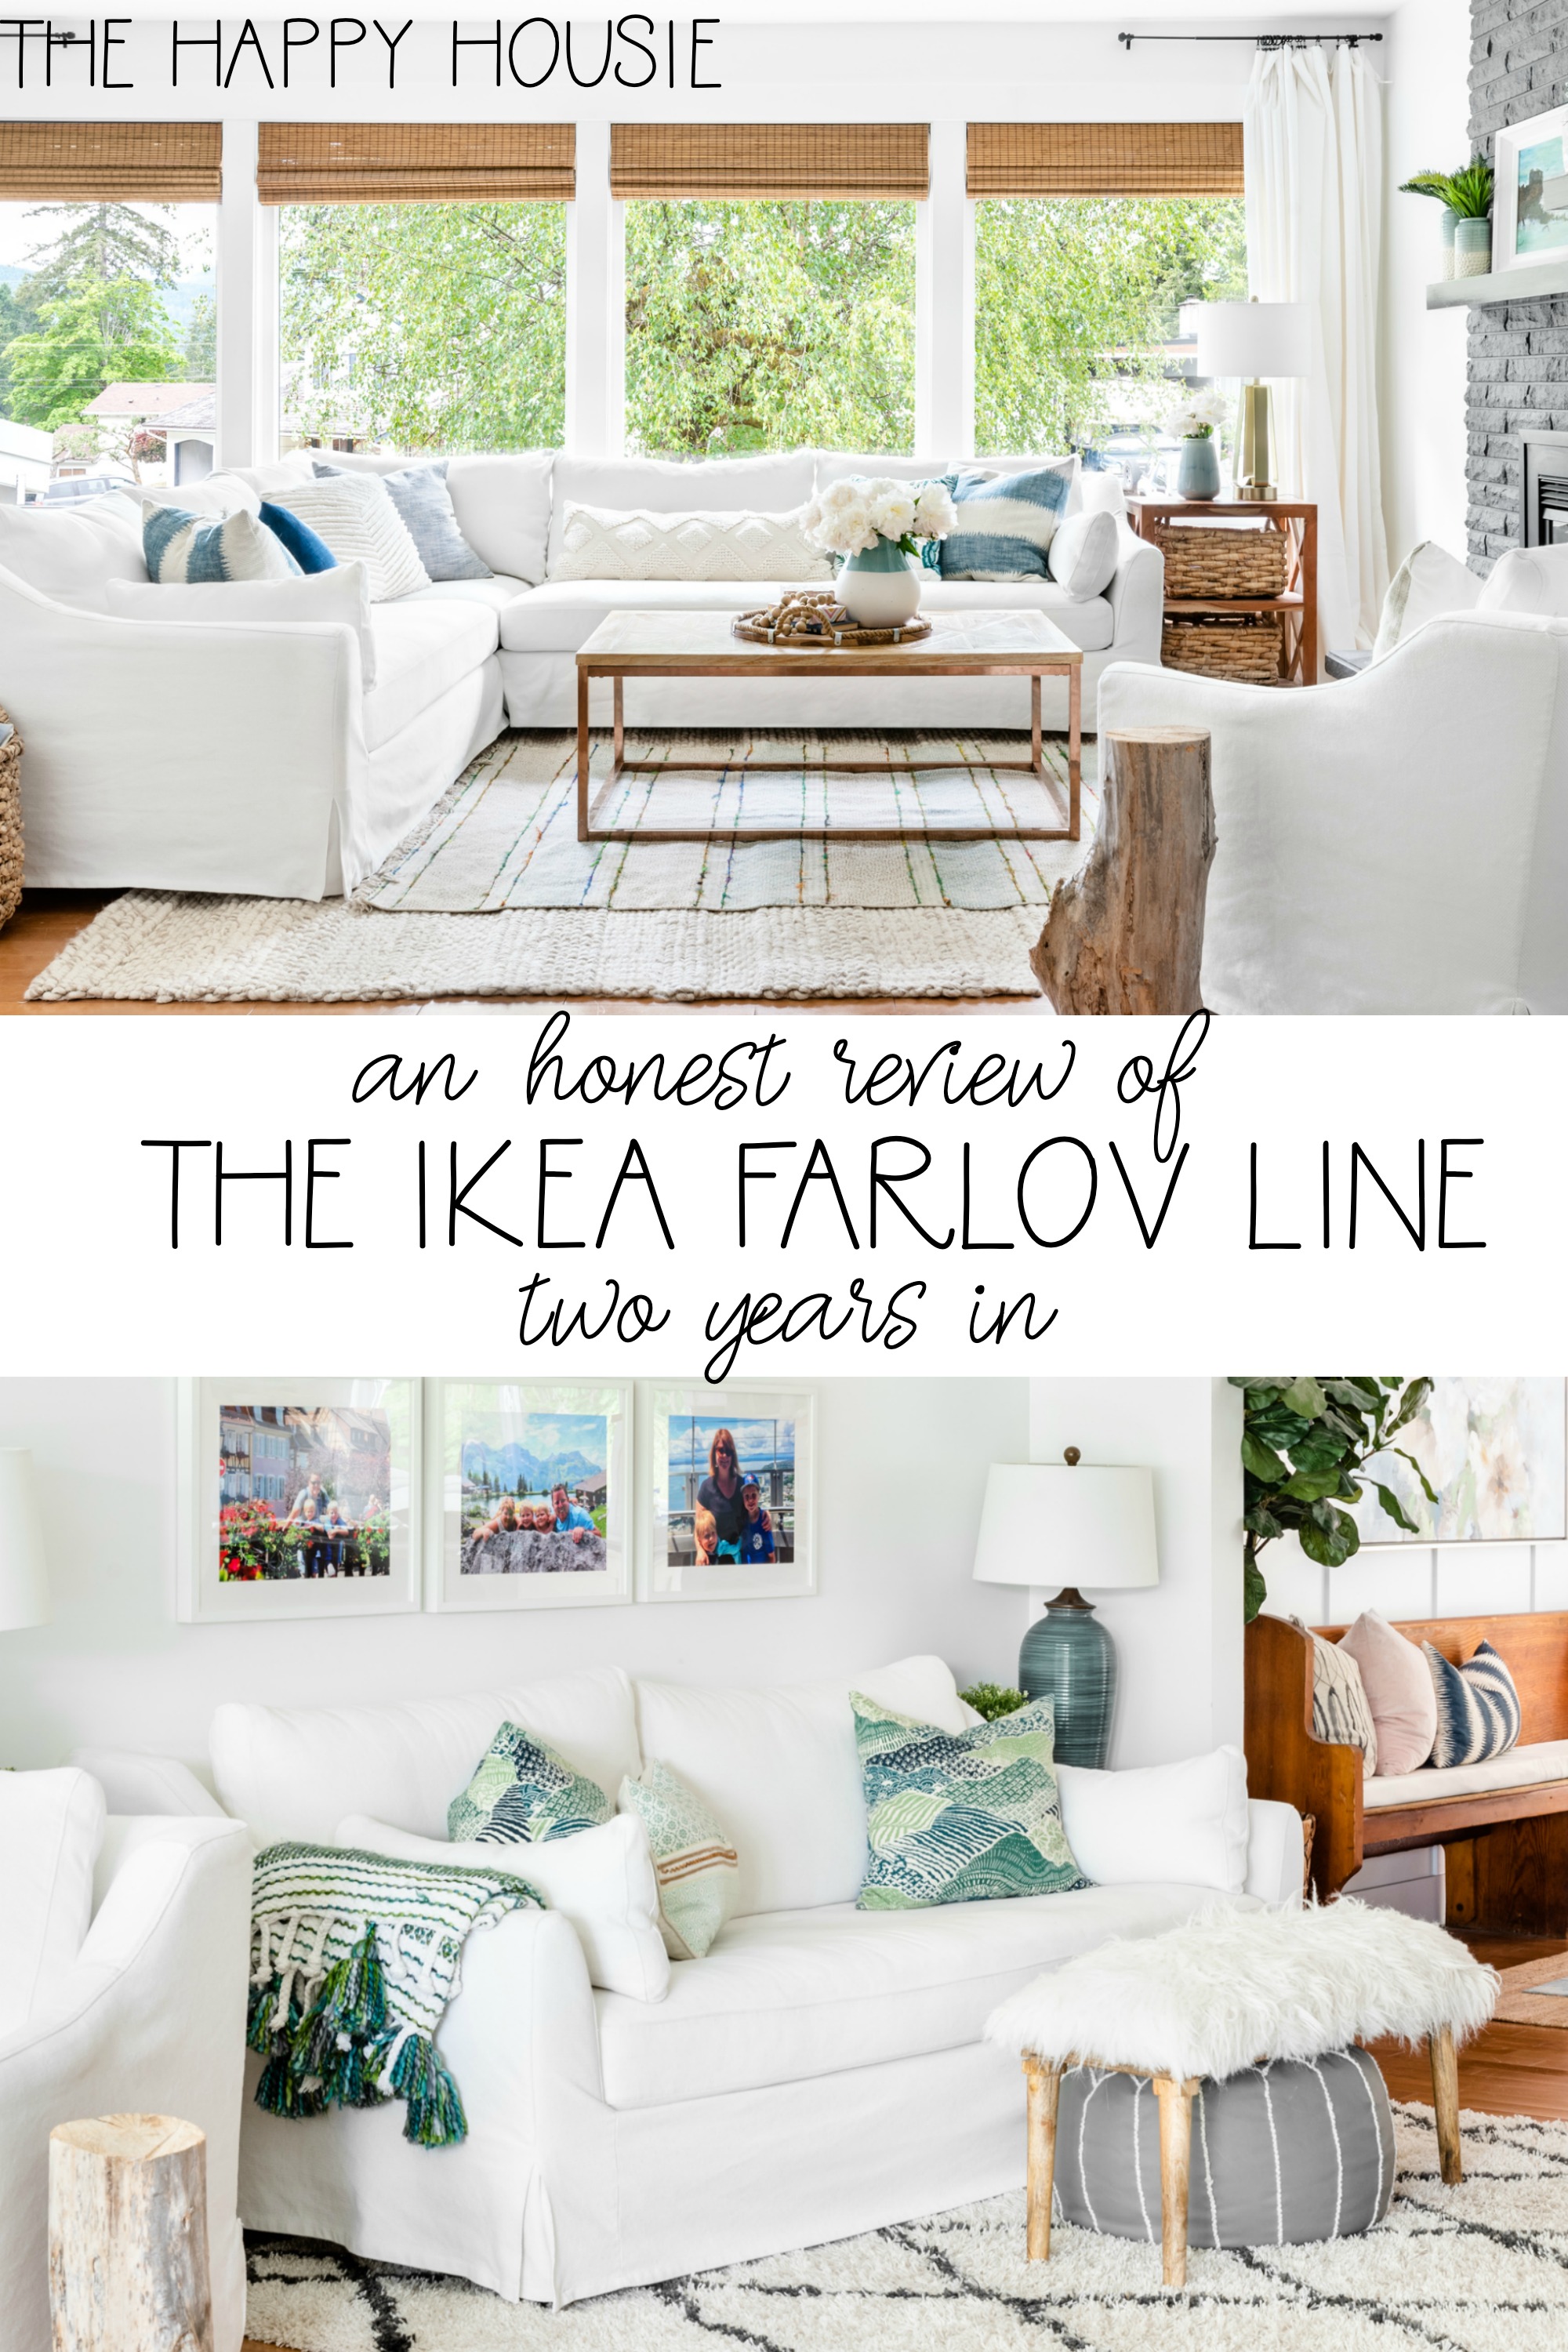 her TRUE Autonomi Review of the Ikea Farlov Sofa Line - Two Years In | The Happy Housie